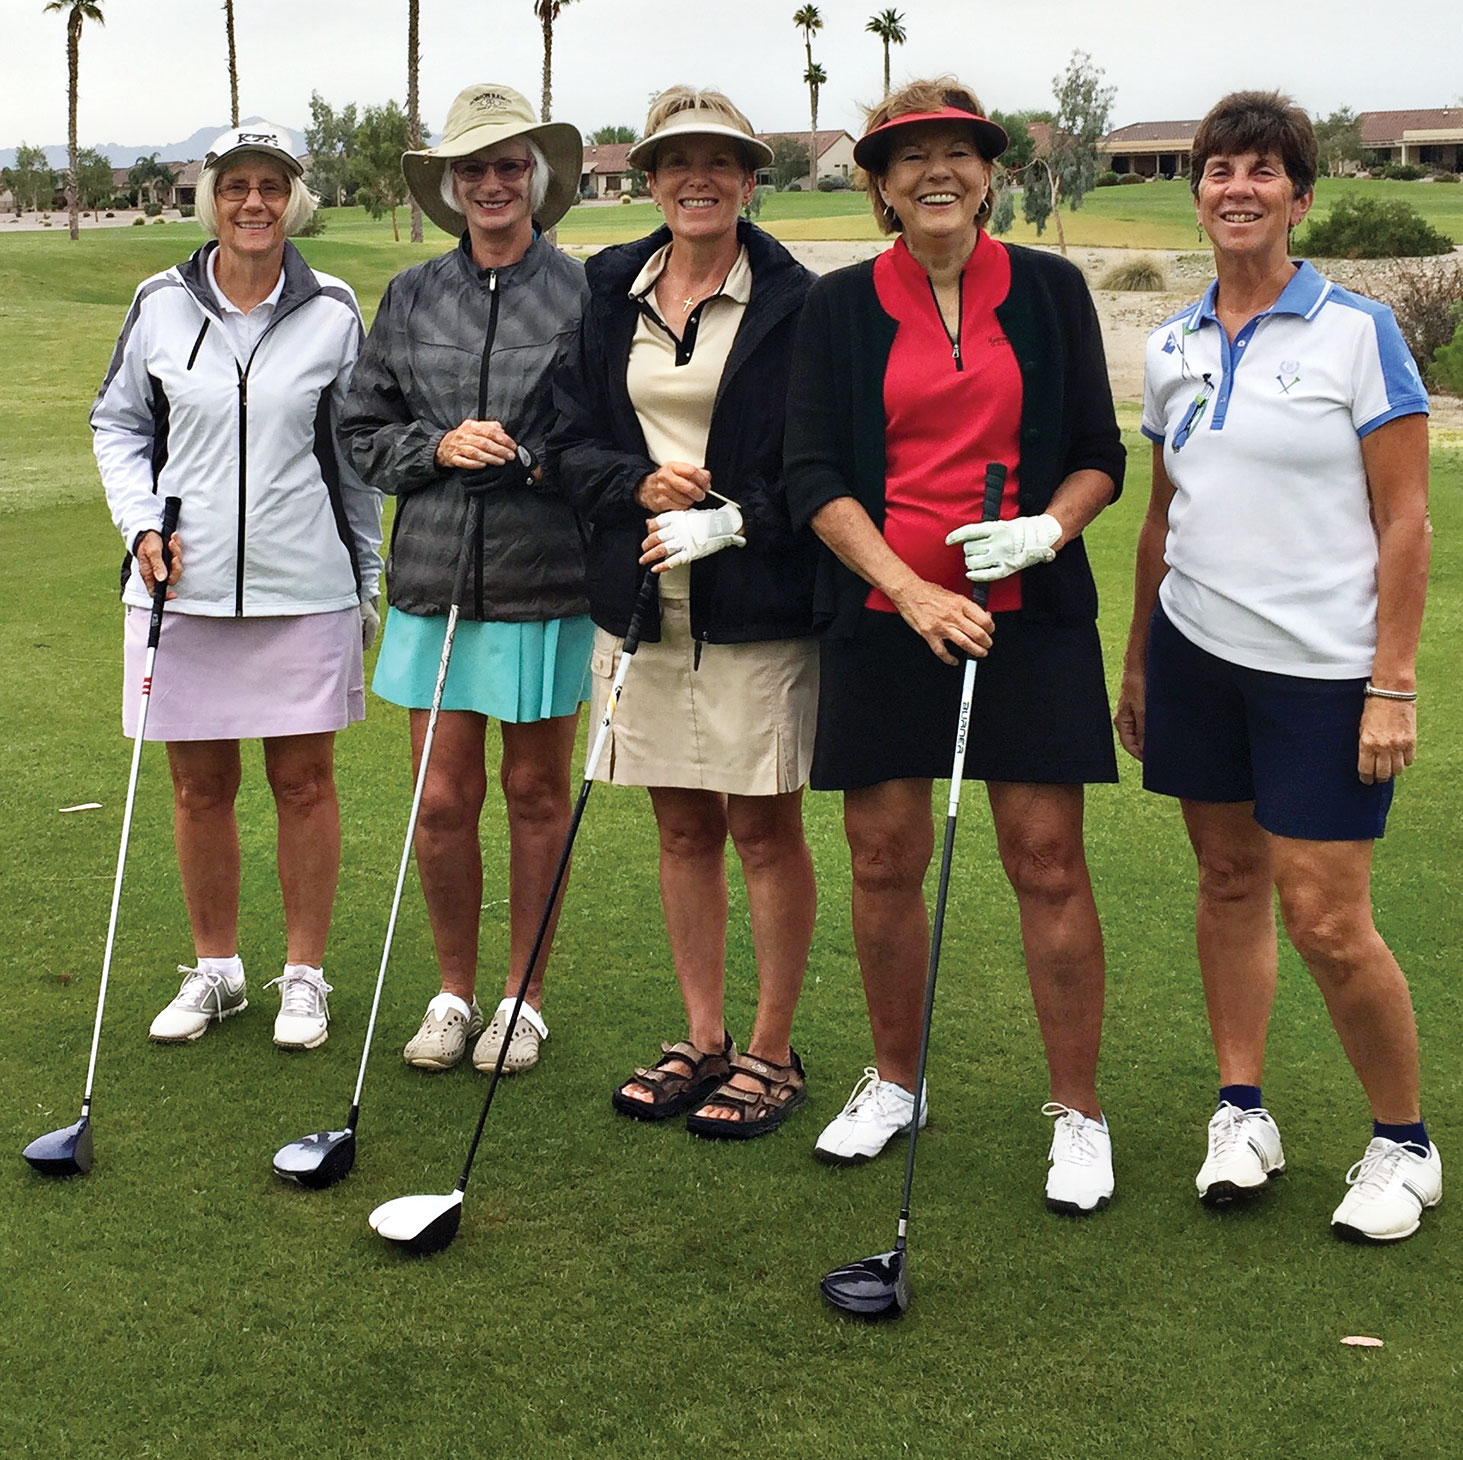 On a cloudy, rainy early morning, the RRLGA had five women who braved the weather. Pat Linderman, Chris Clark, Candy Burtis, Joanne Heiman and Jean DeChristopher were rewarded with beautiful weather after they got through the first few holes. Come on out and join us on Tuesday mornings.